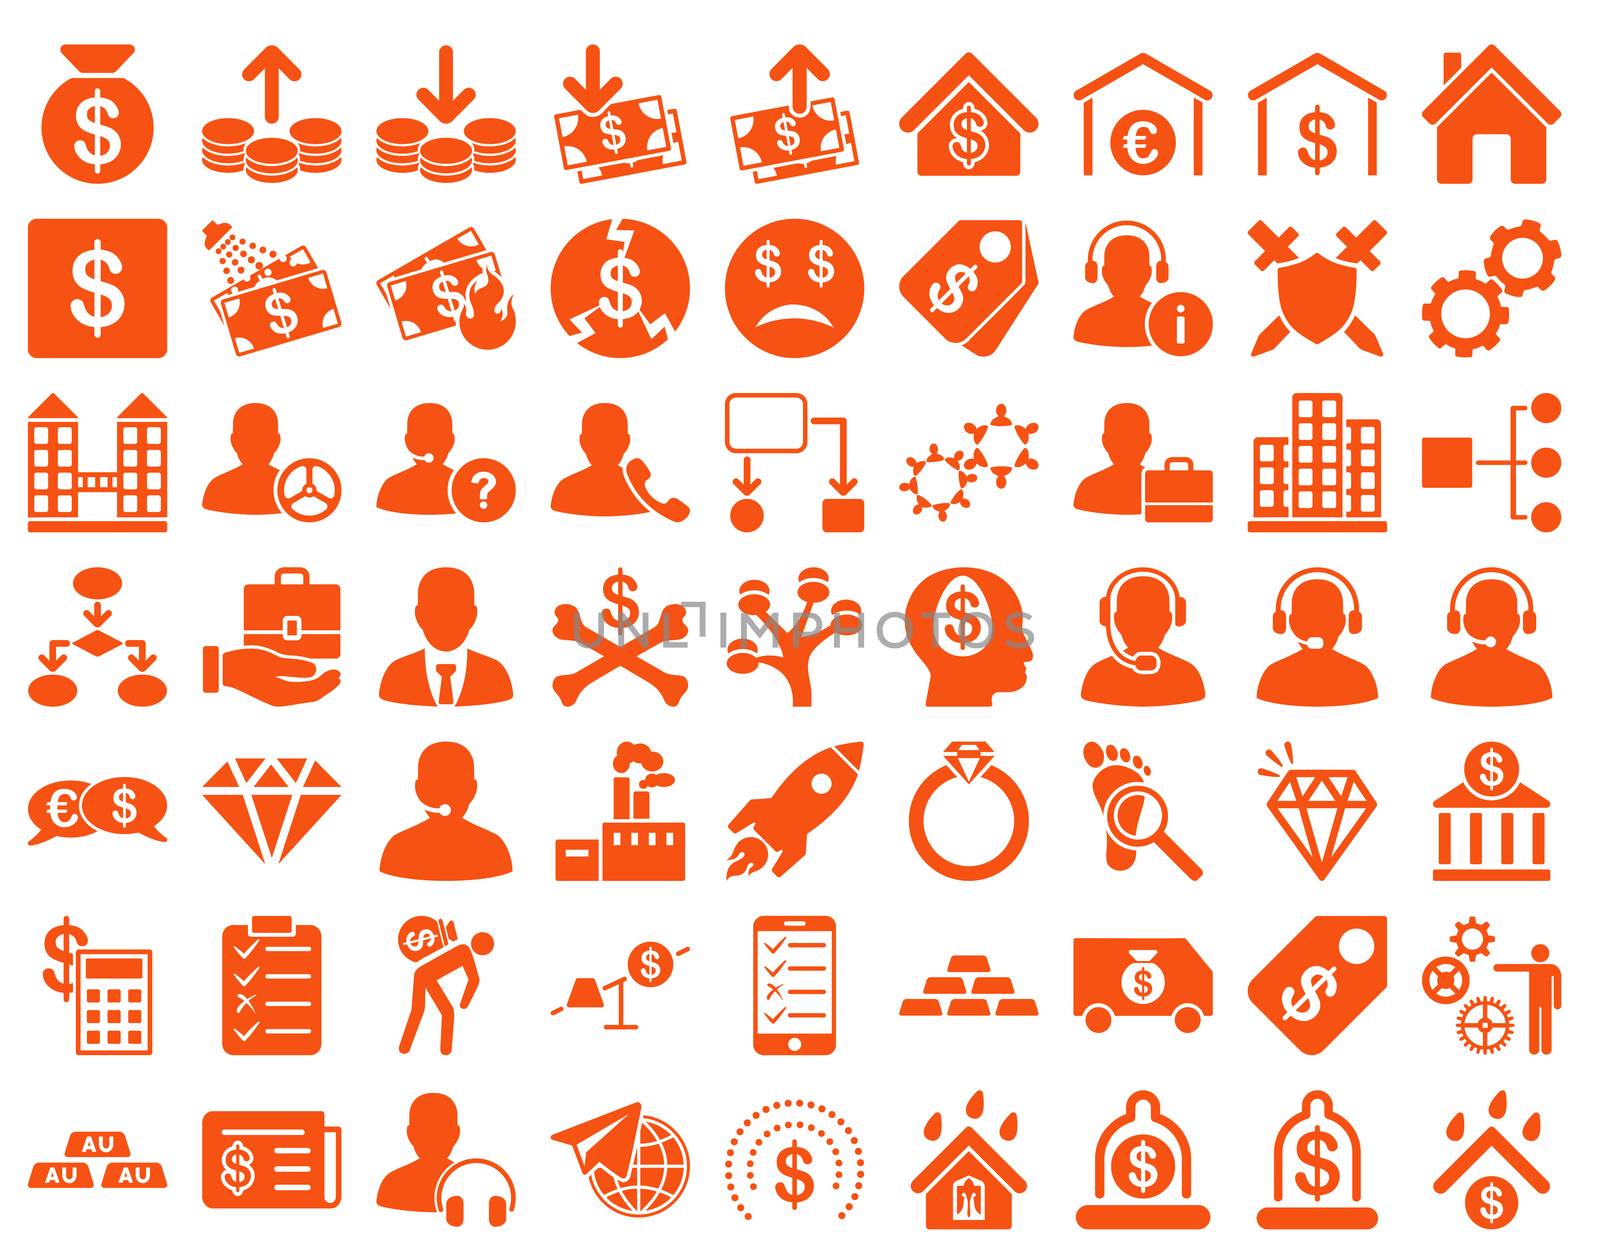 Commerce Icons. These flat icons use orange color. Raster images are isolated on a white background.